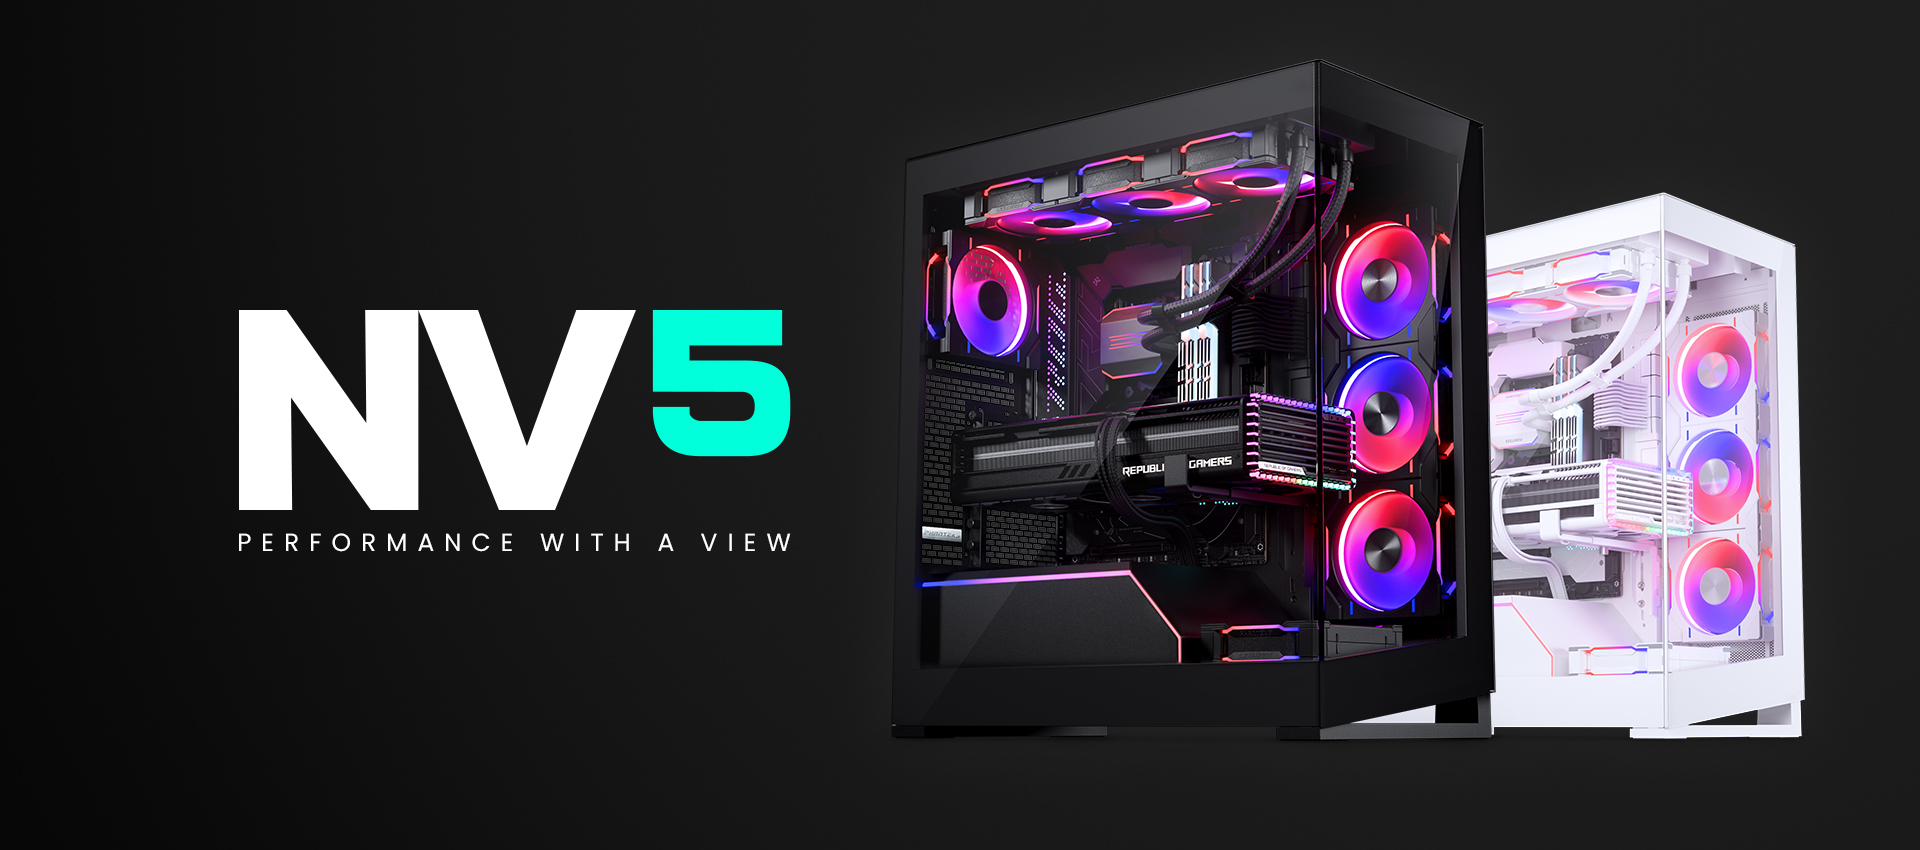 Banner image of NV5 chassis